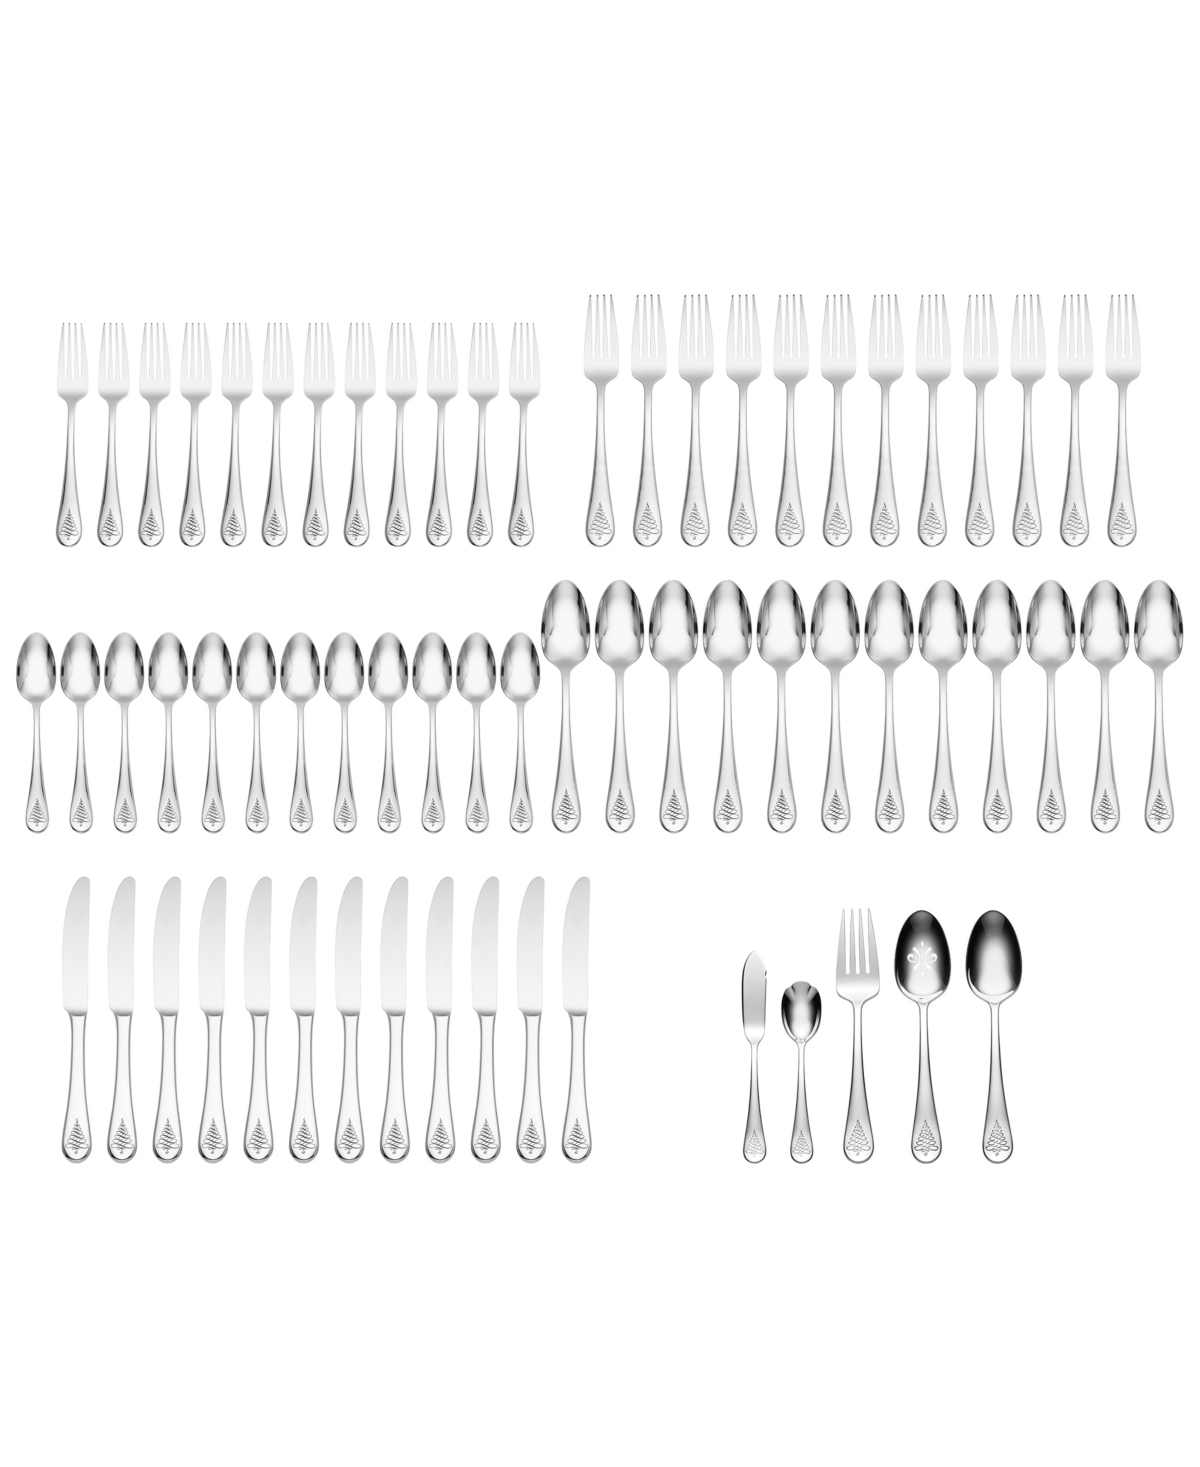 Lenox Noella 65-piece Flatware Set, Service For 12 In Metallic And Stainless